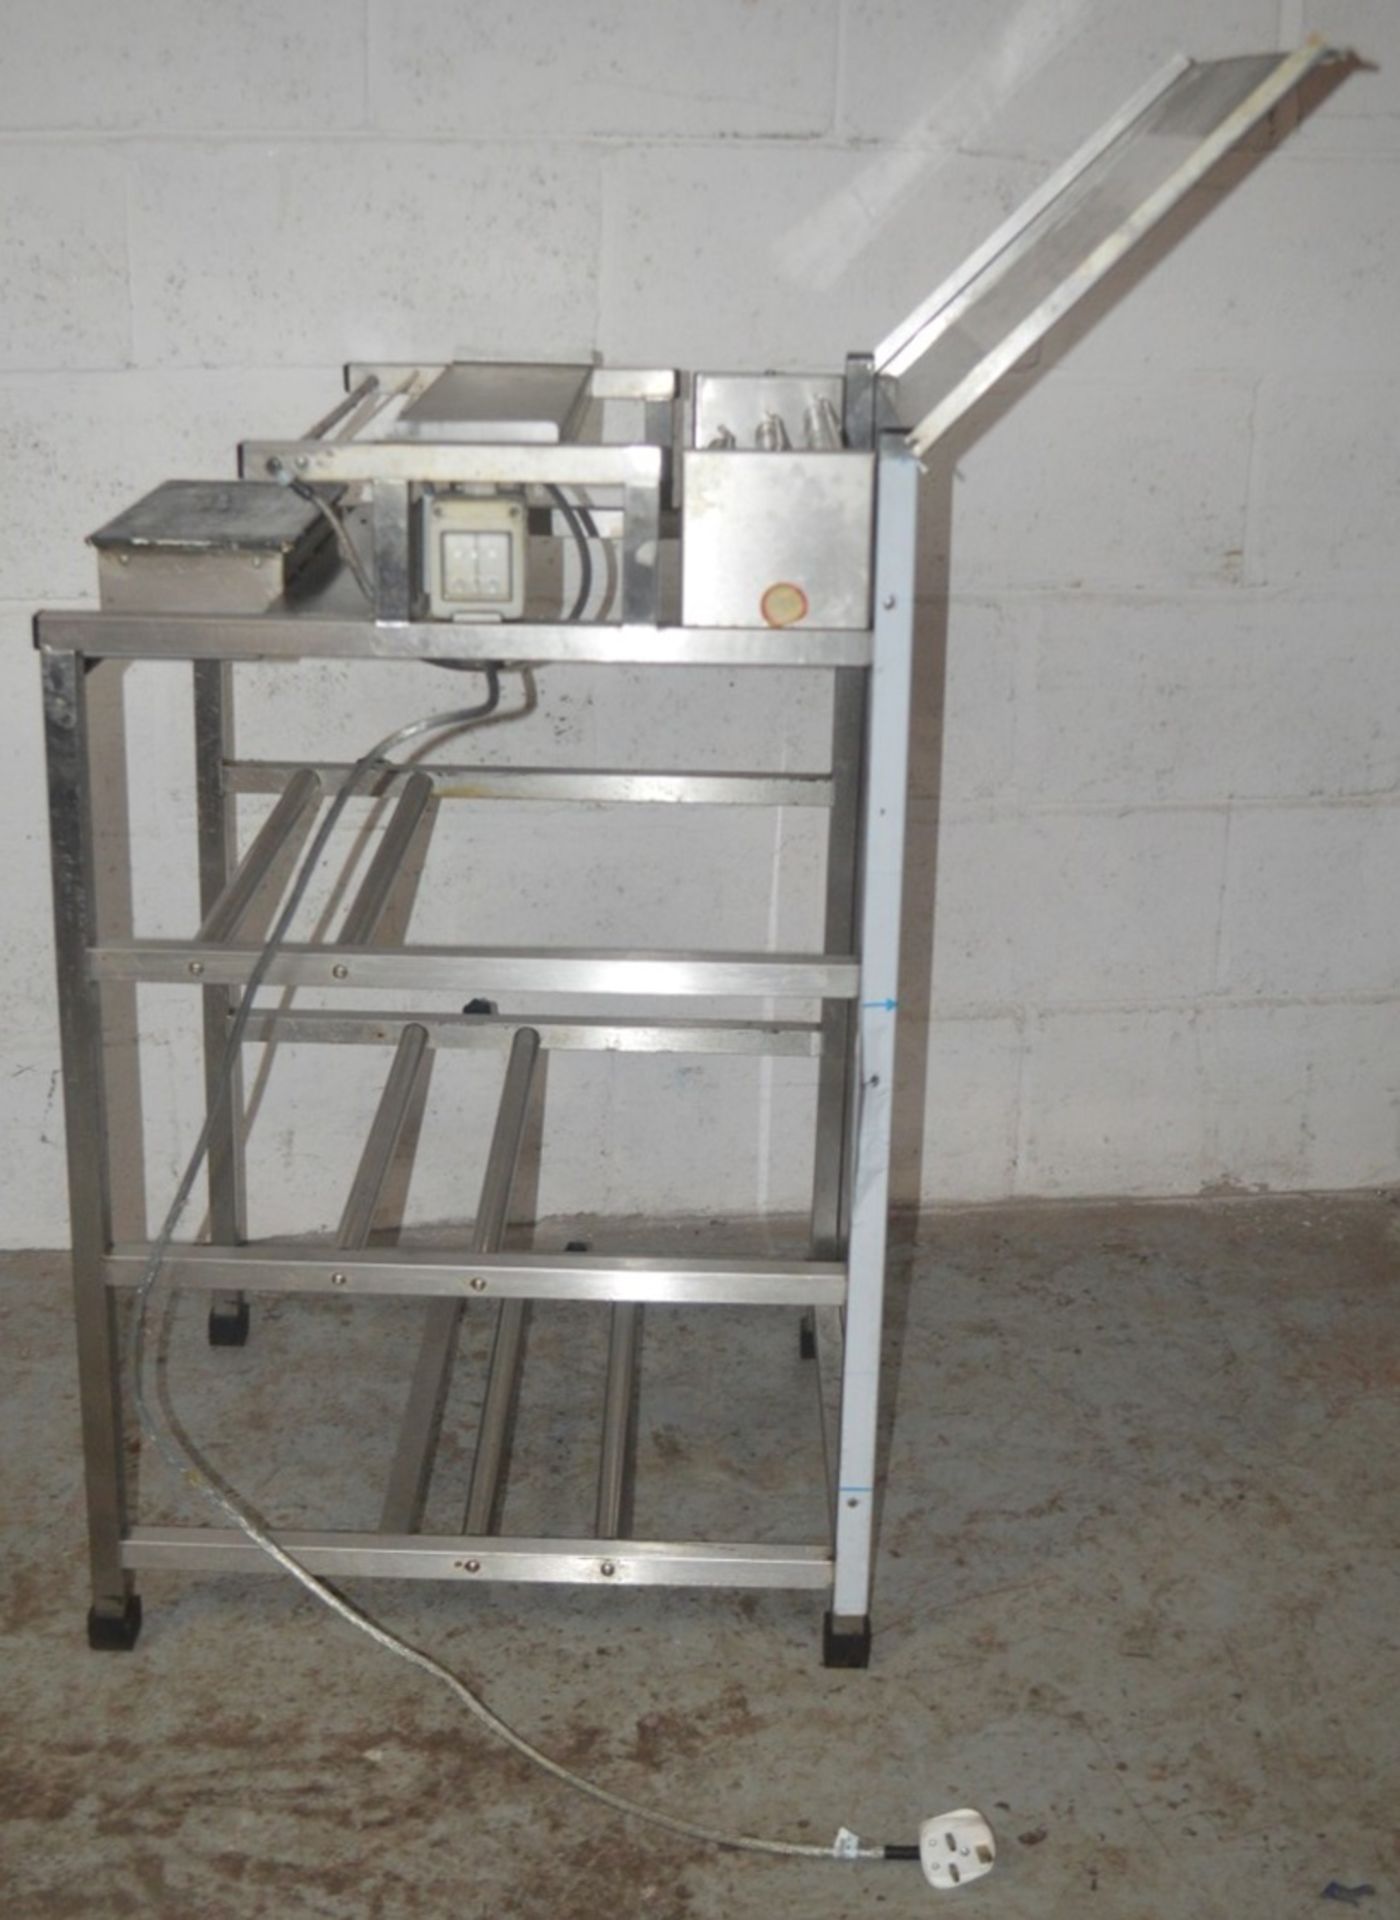 1 x Stainless Steel Commercial Kitchen Sealer Bench With Modesty Panel - Dimensions: H98 x W56 x - Image 5 of 6